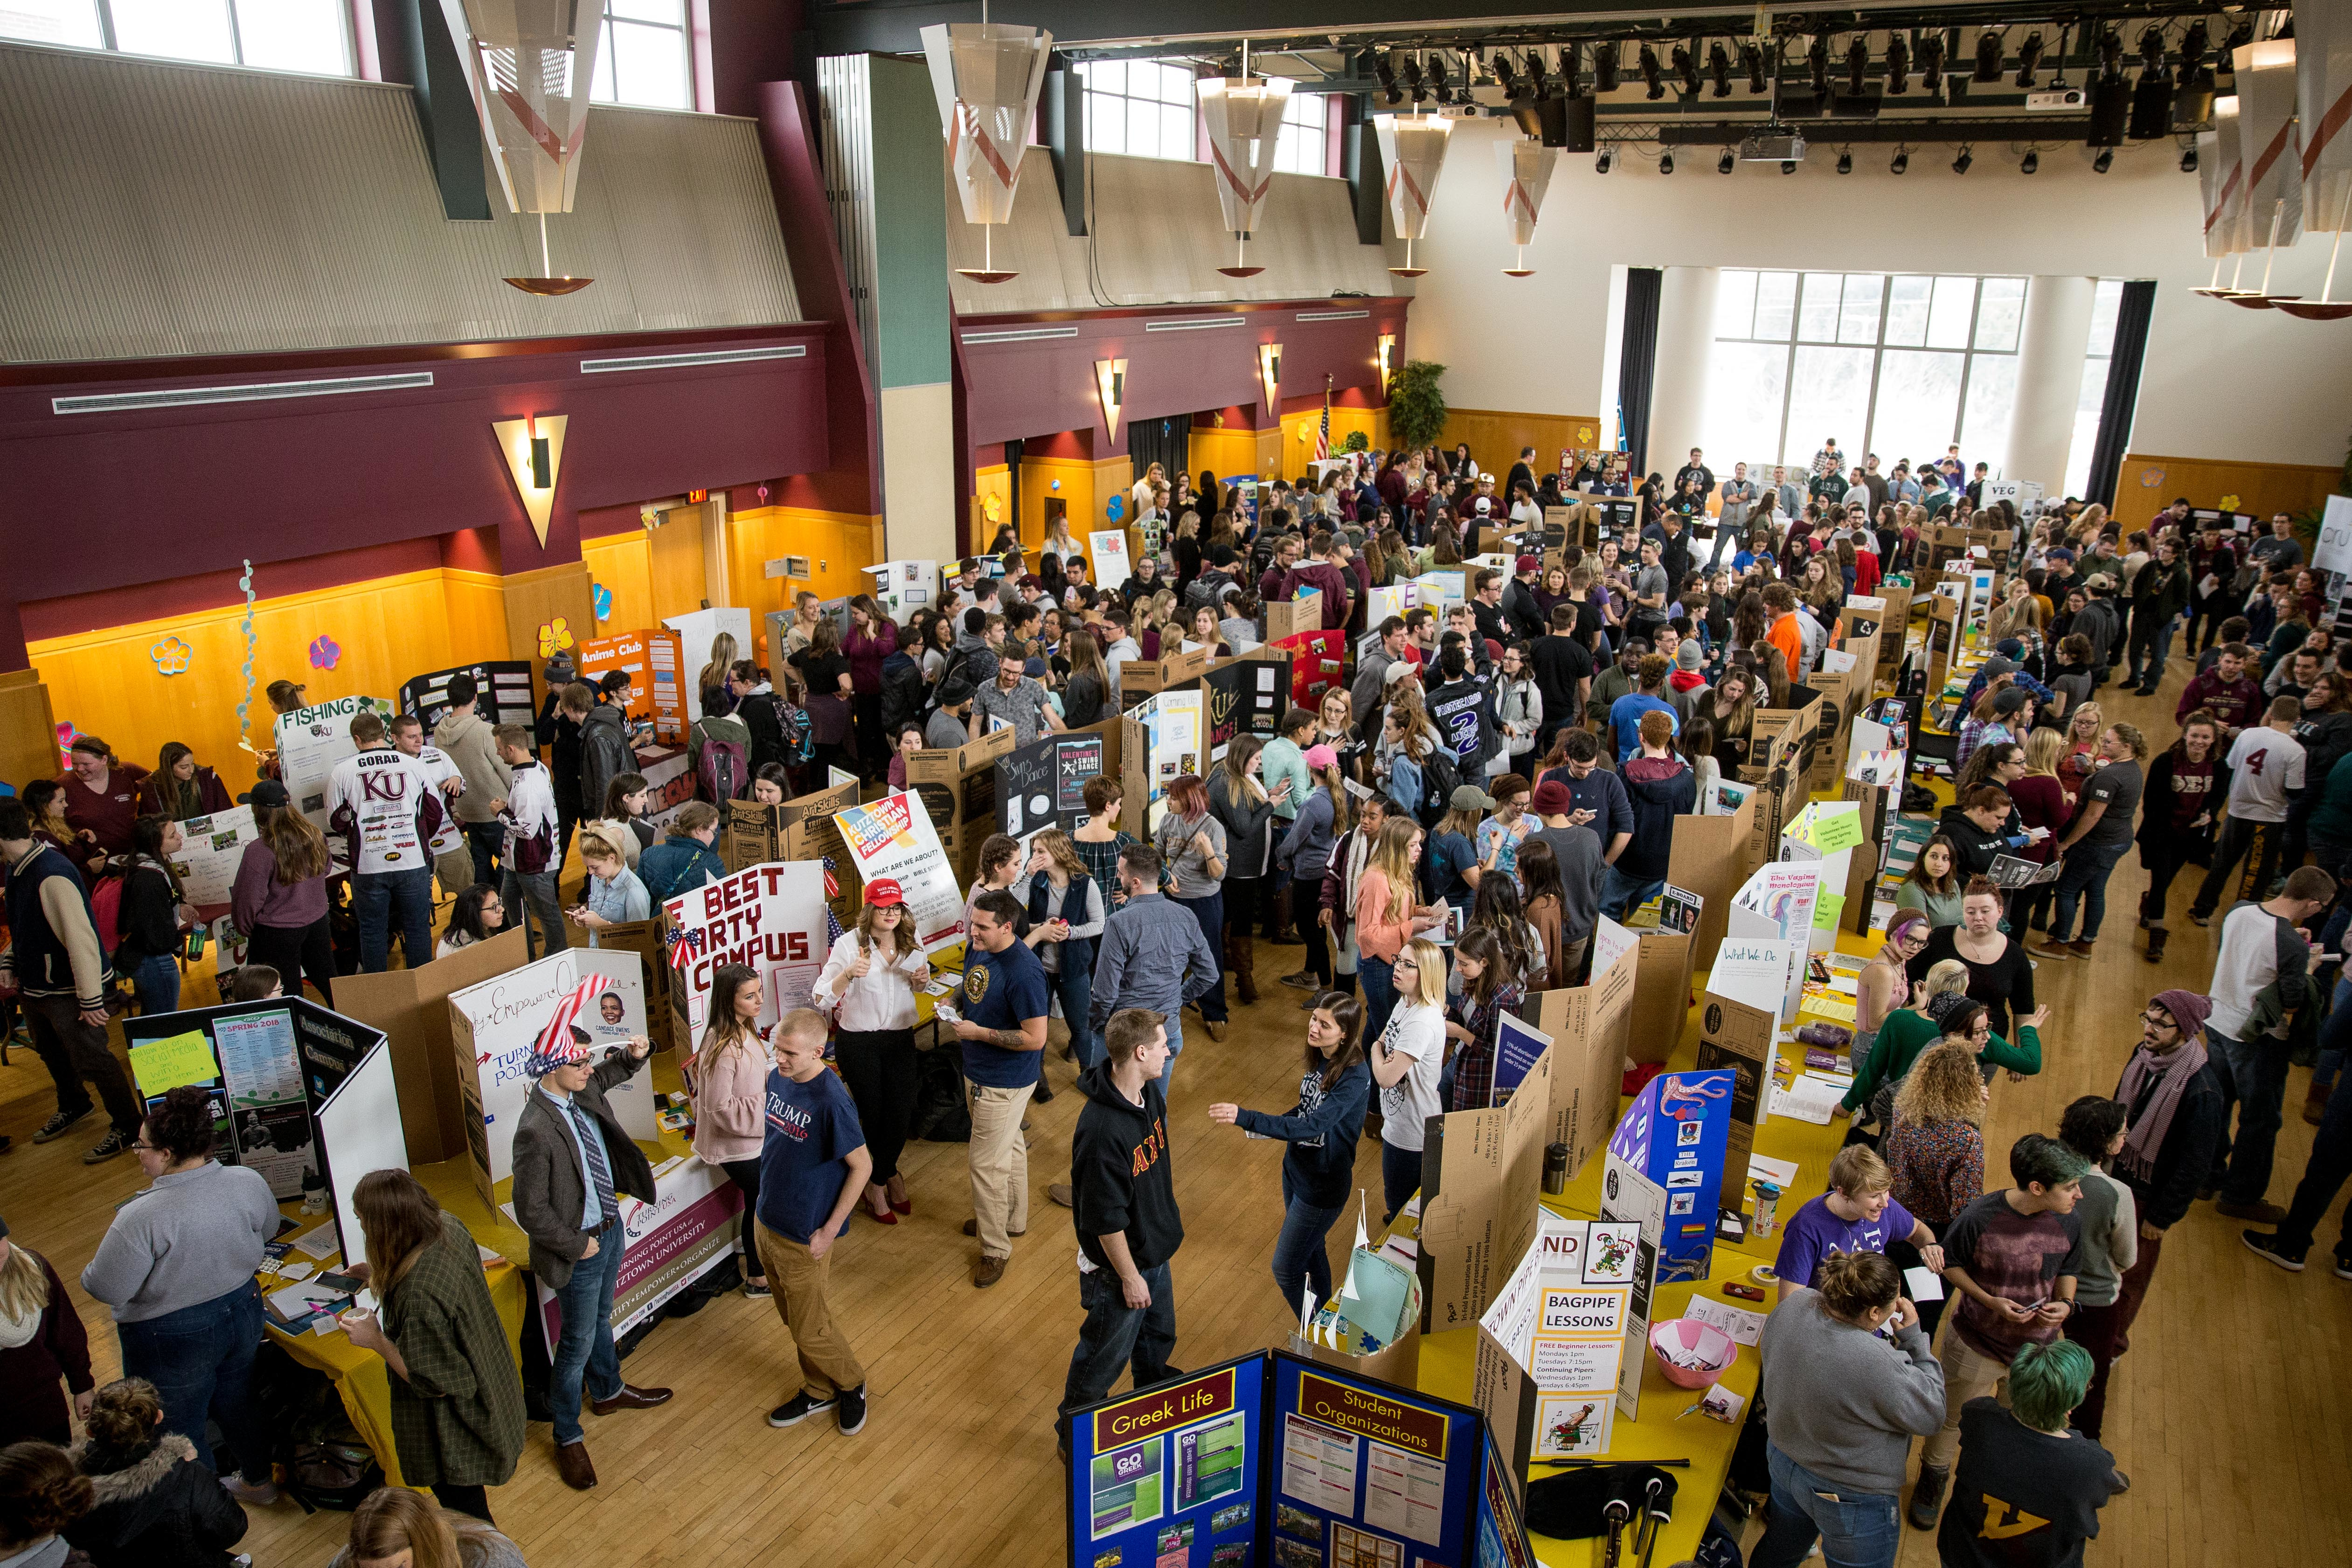 overview photo of large room with many students exploring tables of information about student organizations